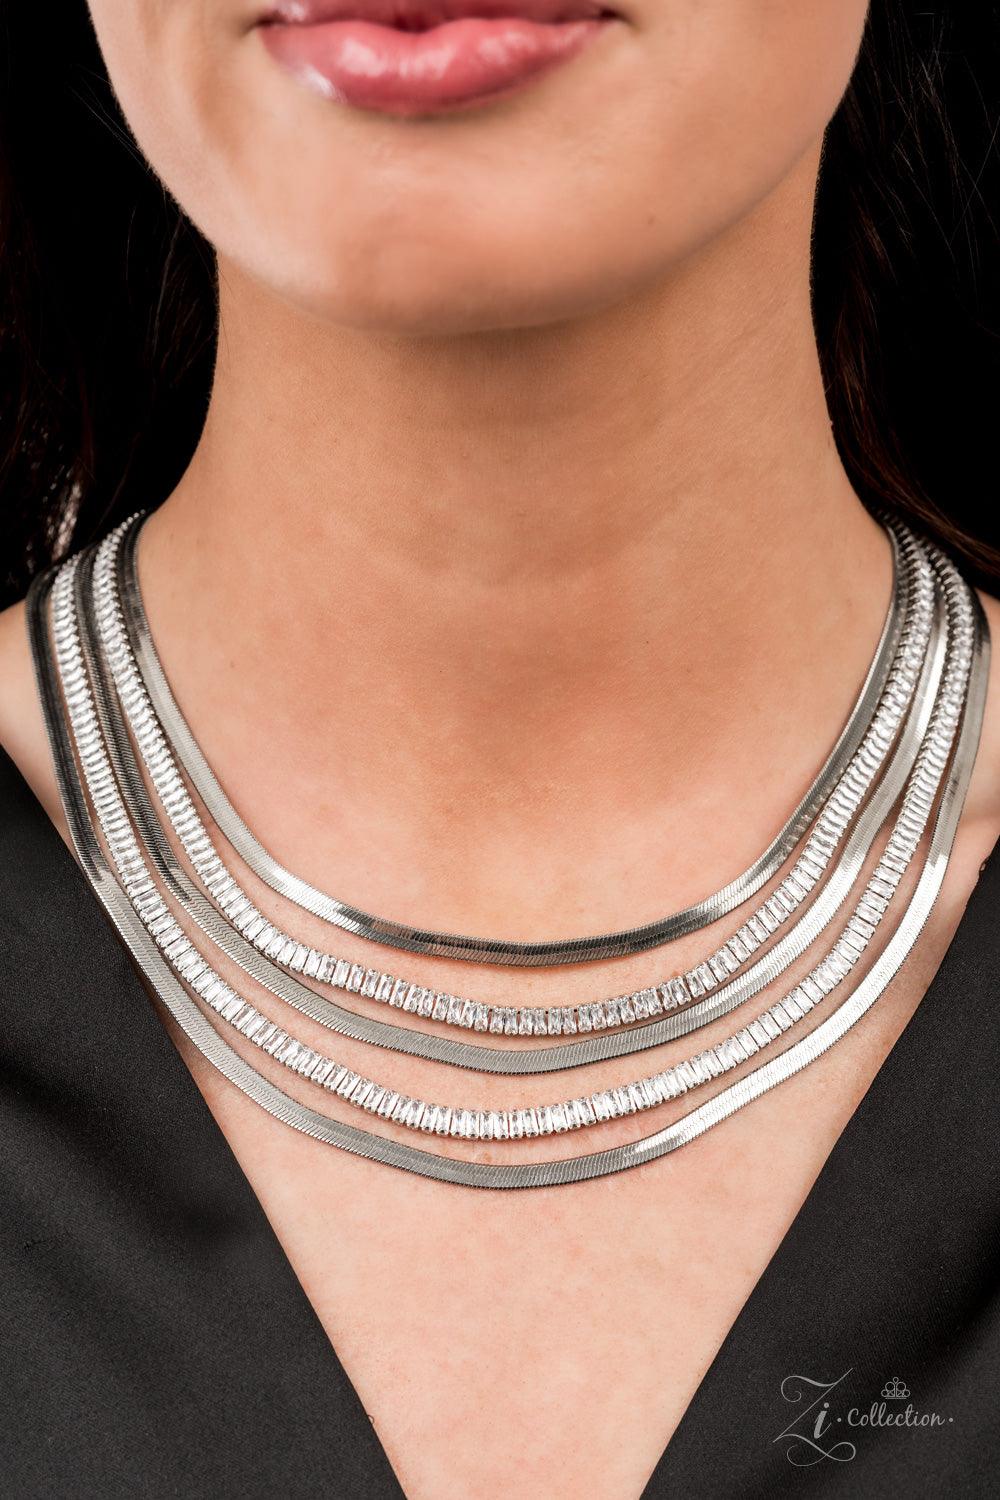 Paparazzi Accessories Persuasive Alternating rows of flat silver snake chain and glassy strands of edgy emerald cut rhinestones sleekly layer below the collar. The deceptively simple metallic silver and white rhinestone palette is unapologetically mesmeri